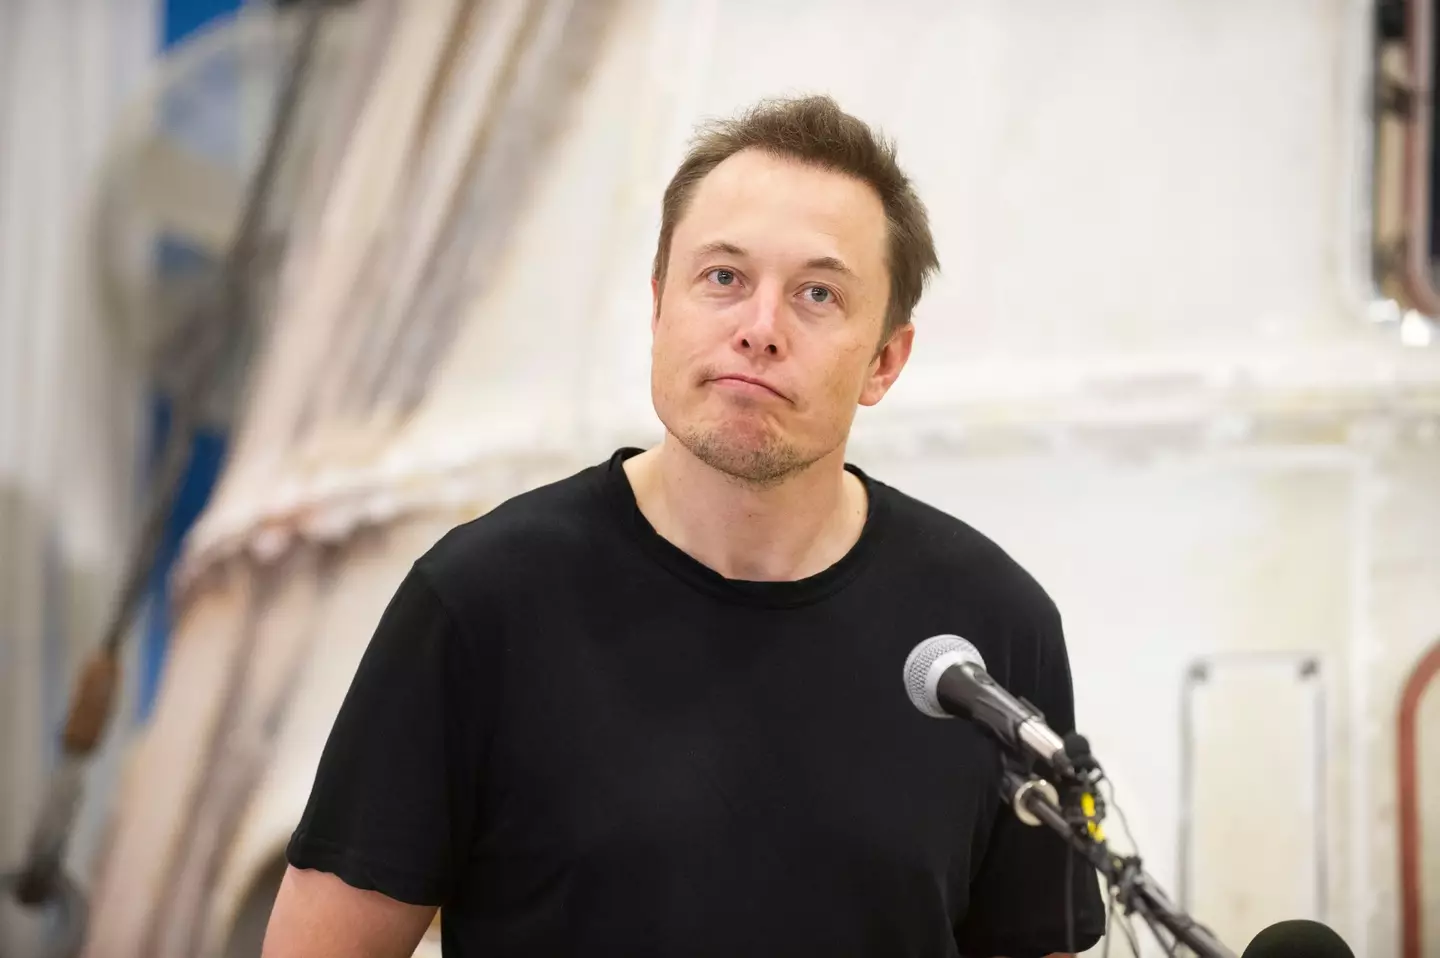 Elon Musk has put his Twitter acquisition on hold.